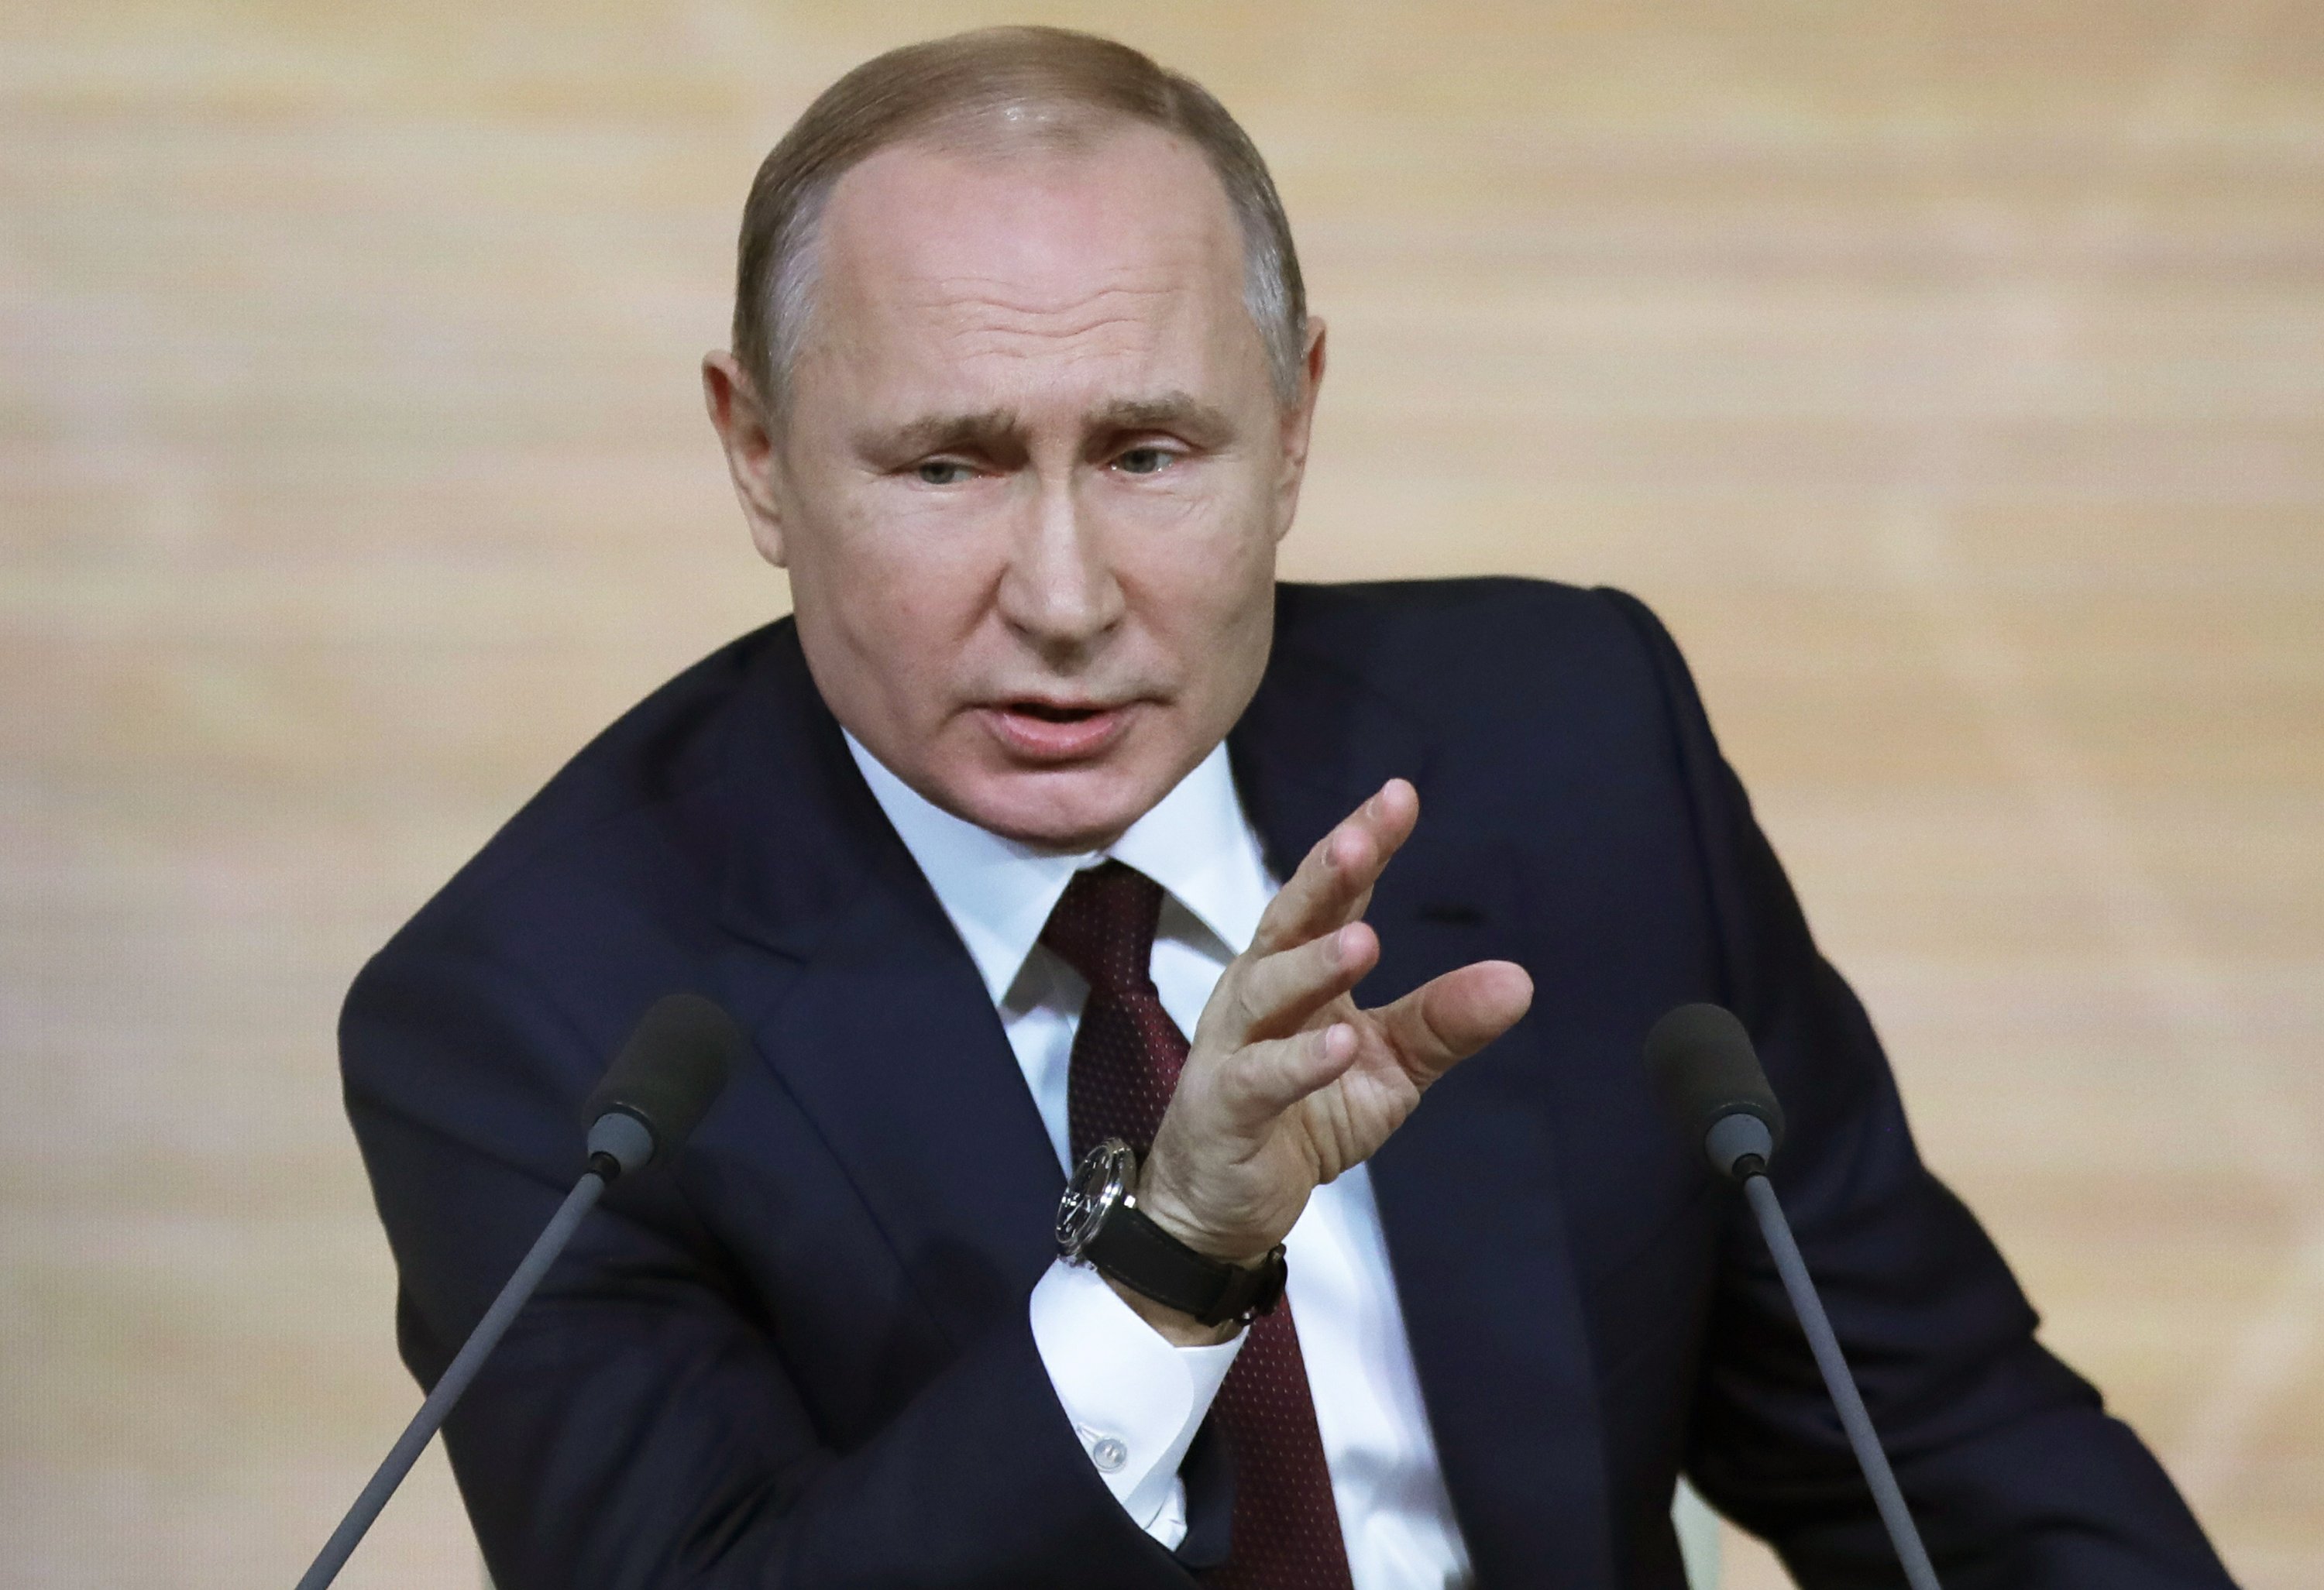 Putin acknowledges threats posed by climate change - The Associated Press